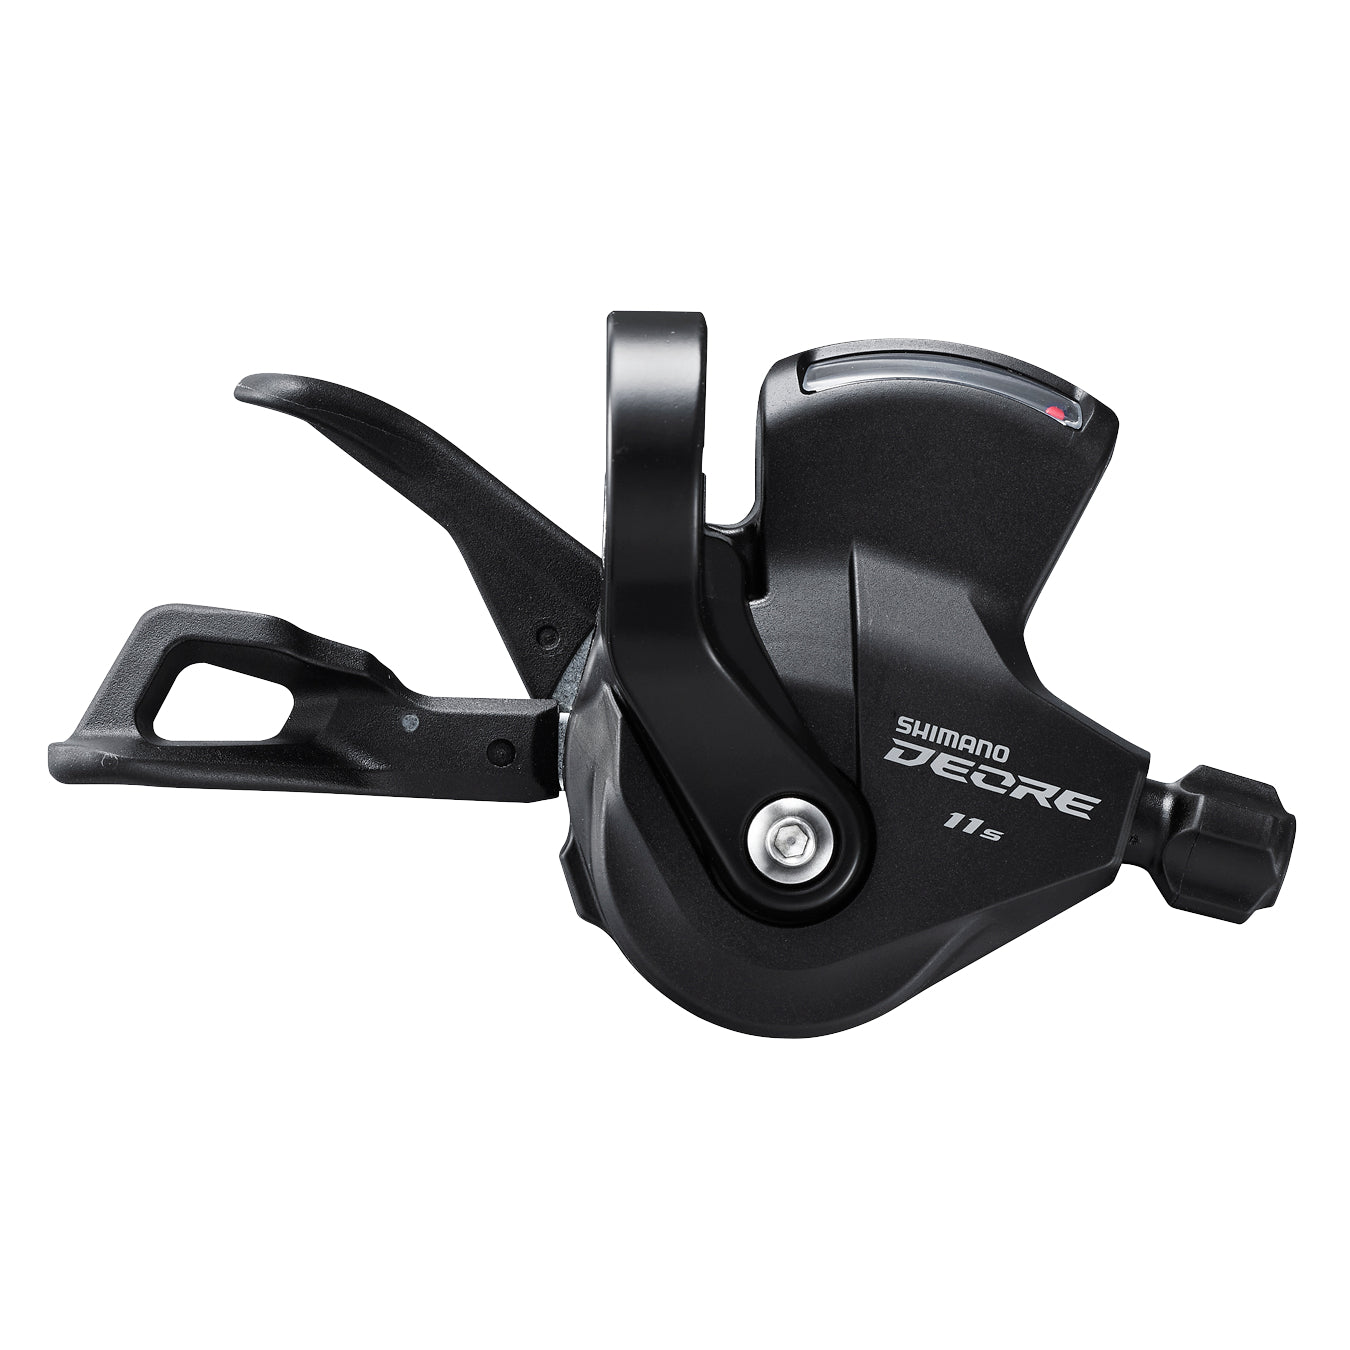 Shimano DEORE M5100 11 Speed RAPIDFIRE PLUS Shifting Lever Clamp Band-Bicycle Shifters-Shimano